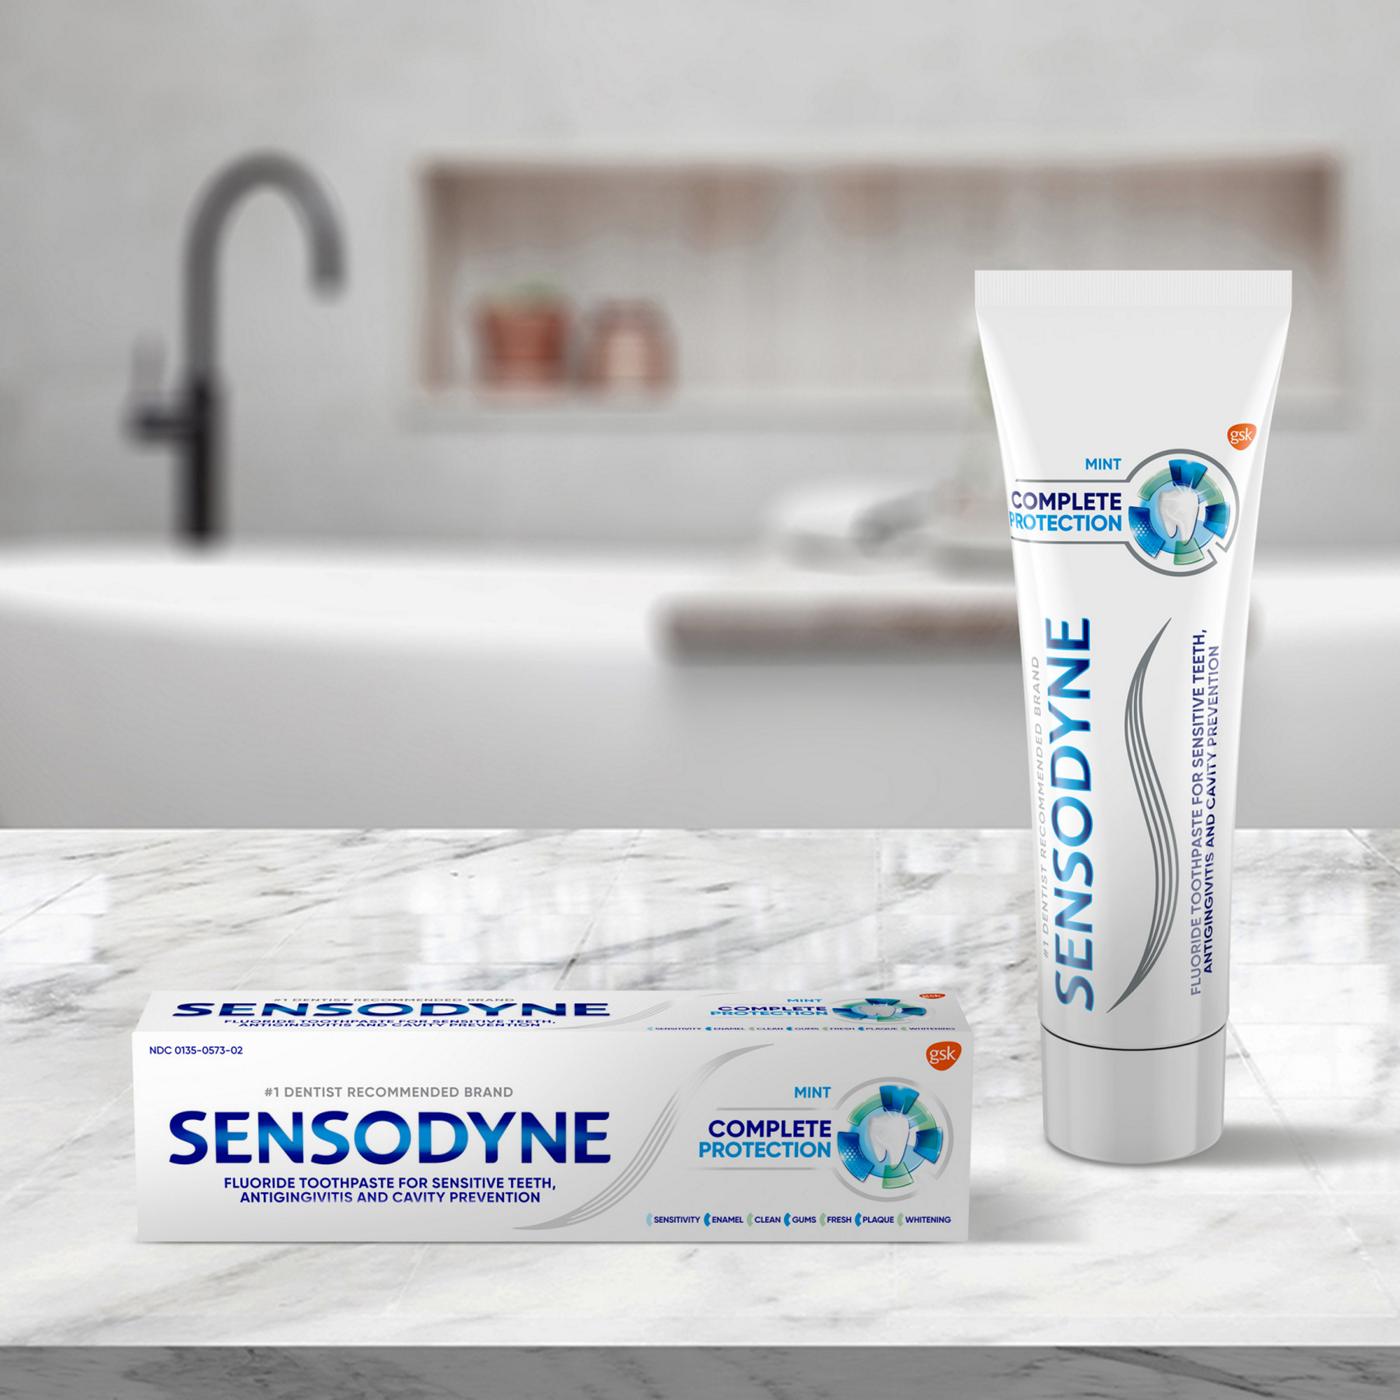 Sensodyne Complete Protection Toothpaste - Mint; image 6 of 8